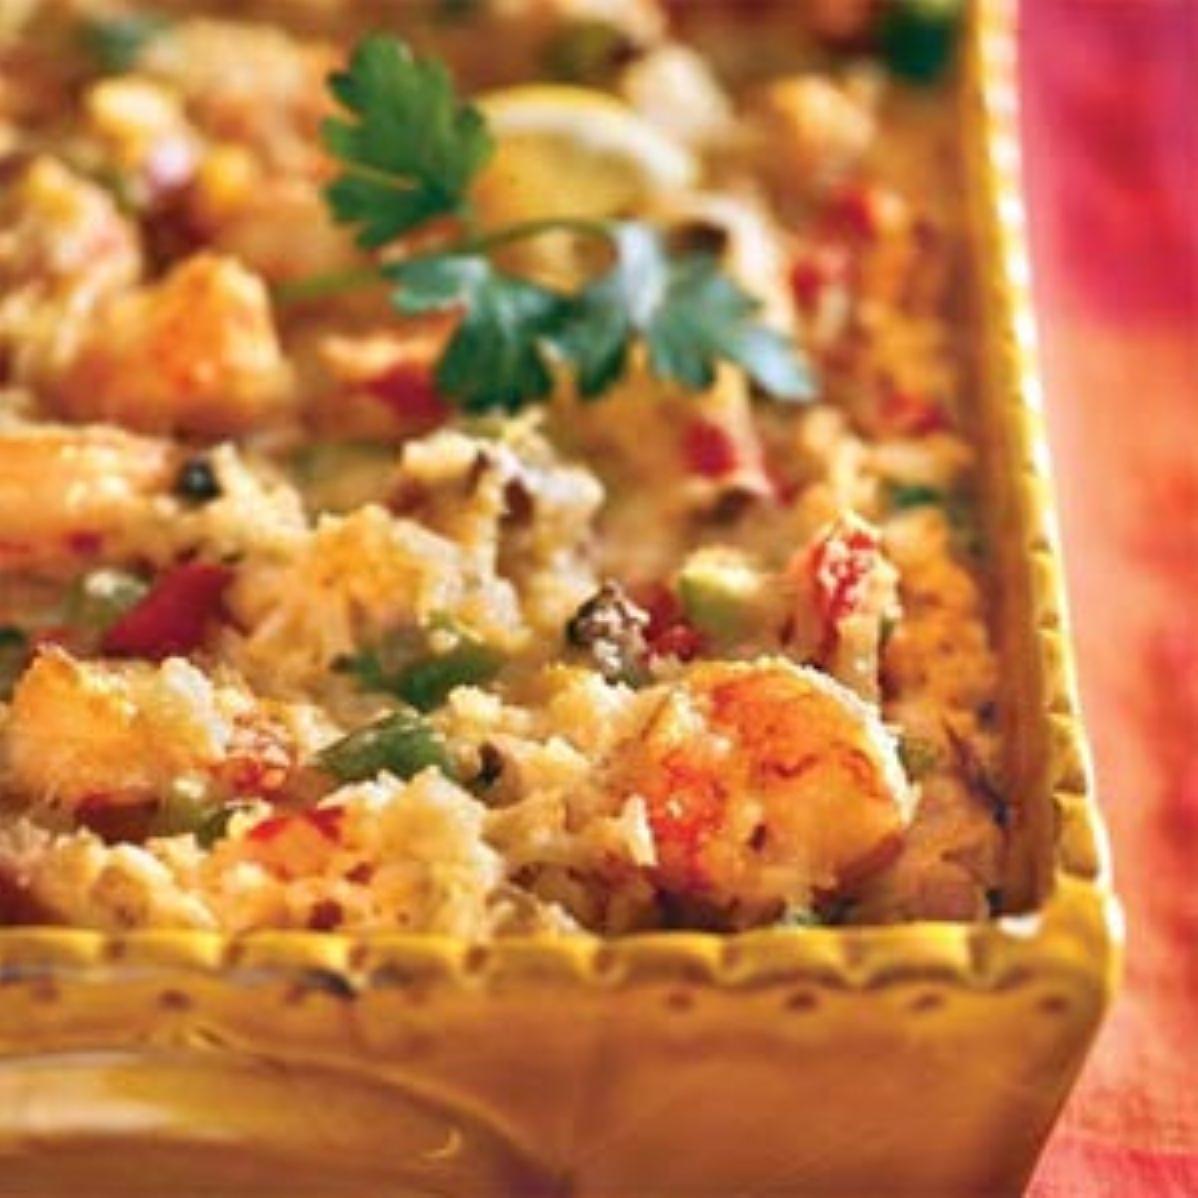  It’s time to bring Brazil to your plate with melted cheese, shrimp, and corn bursting with bright flavors.